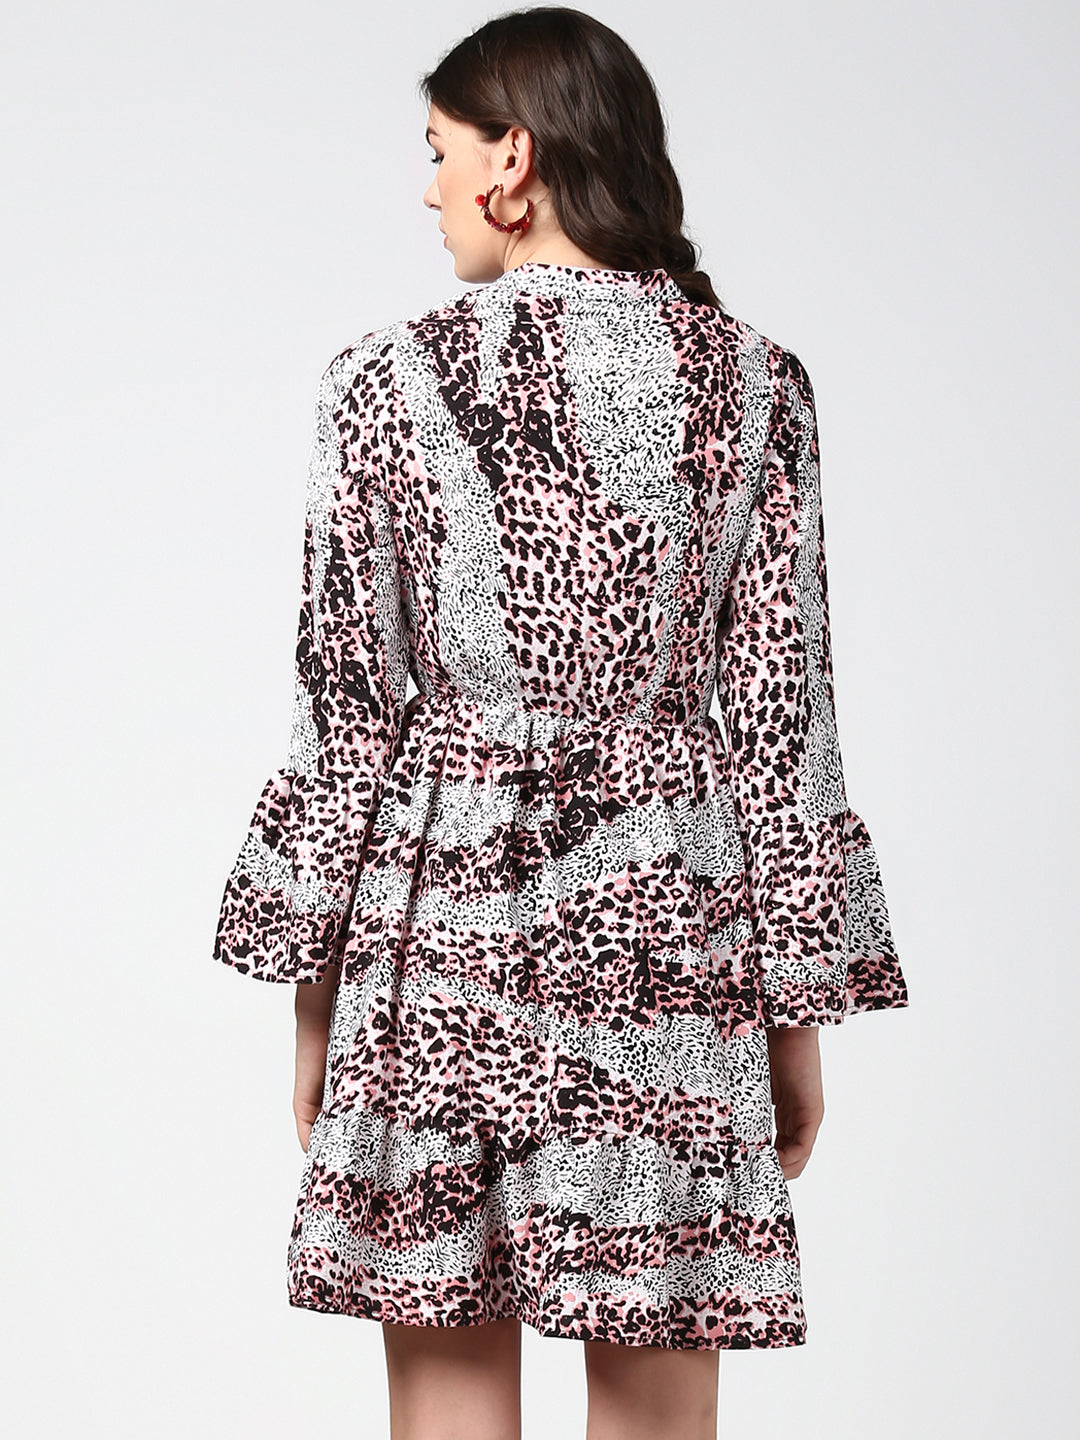 Women's Pink and Black Animal Print Dress with Bell Sleeves